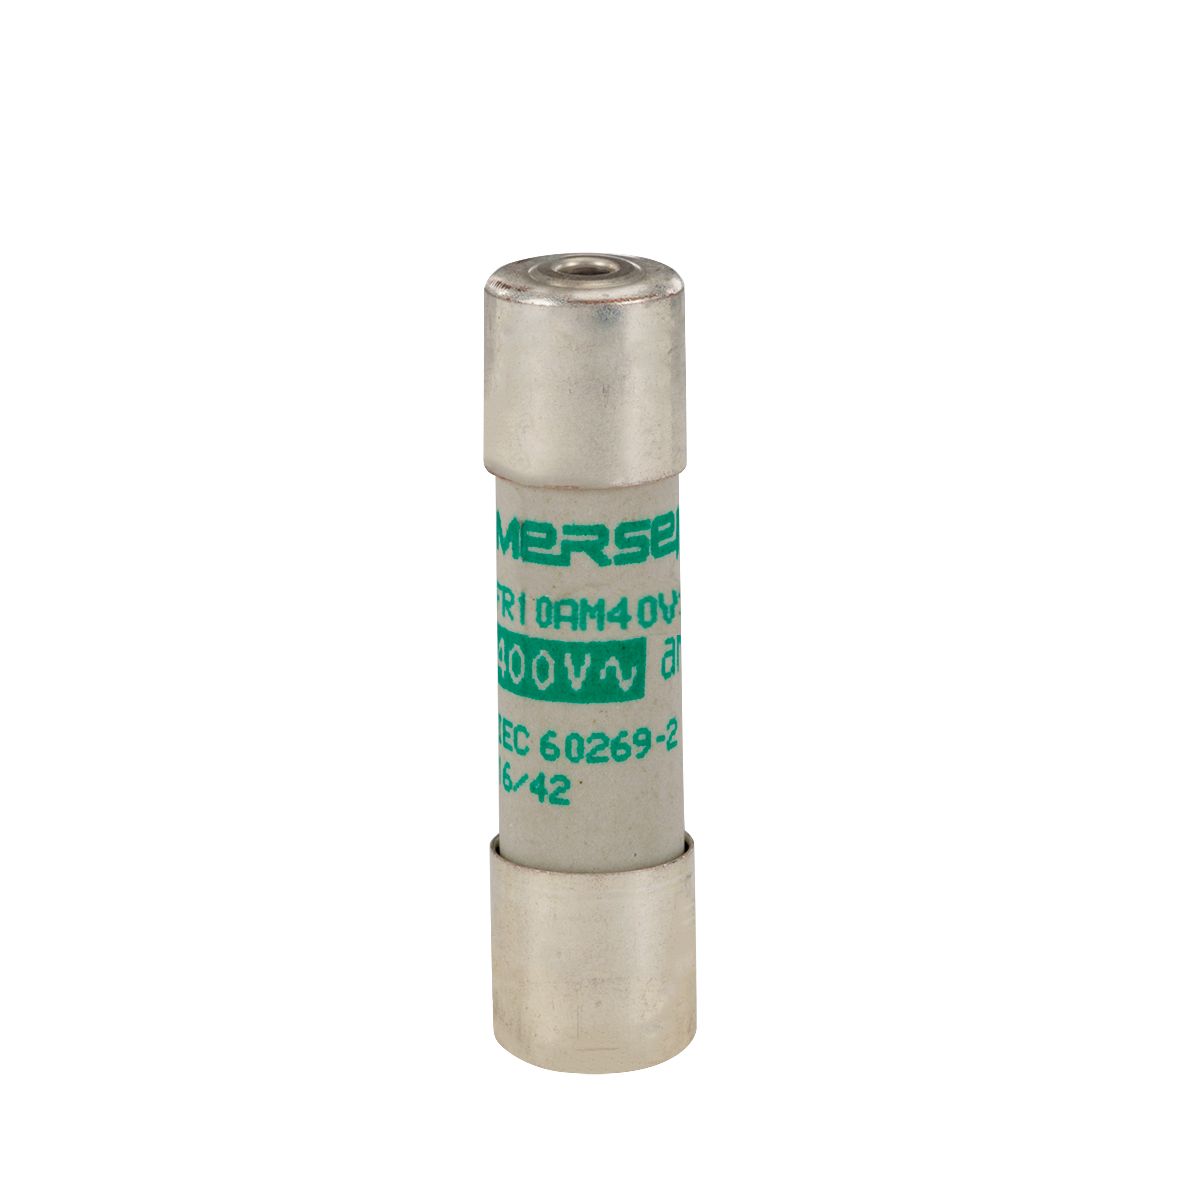 X085258 - Cylindrical fuse-link aM 400VAC 10.3x38, 12A with striker